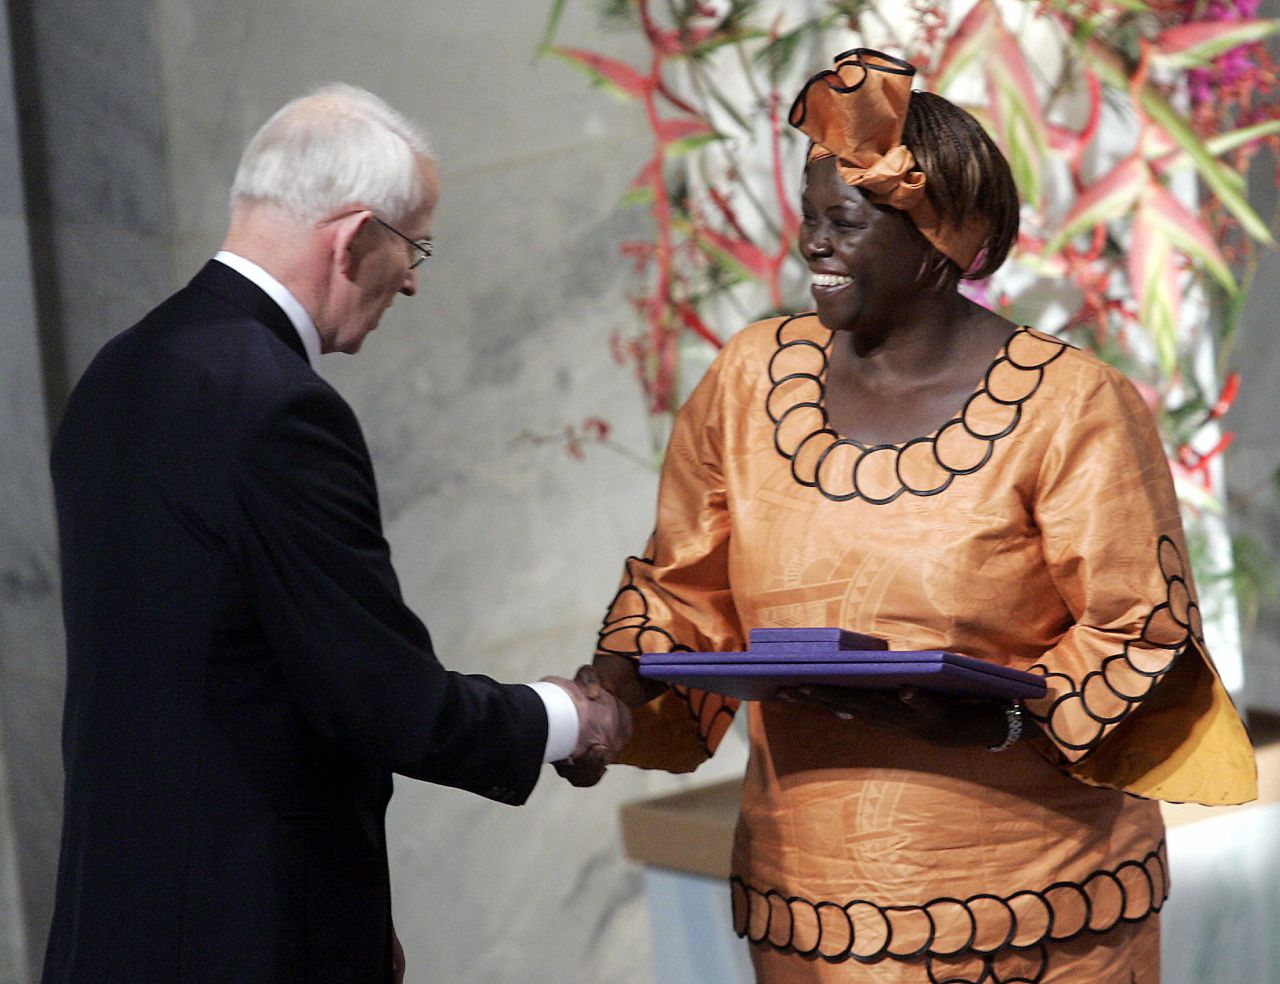 In 2004, she was awarded the Nobel Peace Prize for her efforts to promote sustainable development, democracy and peace.